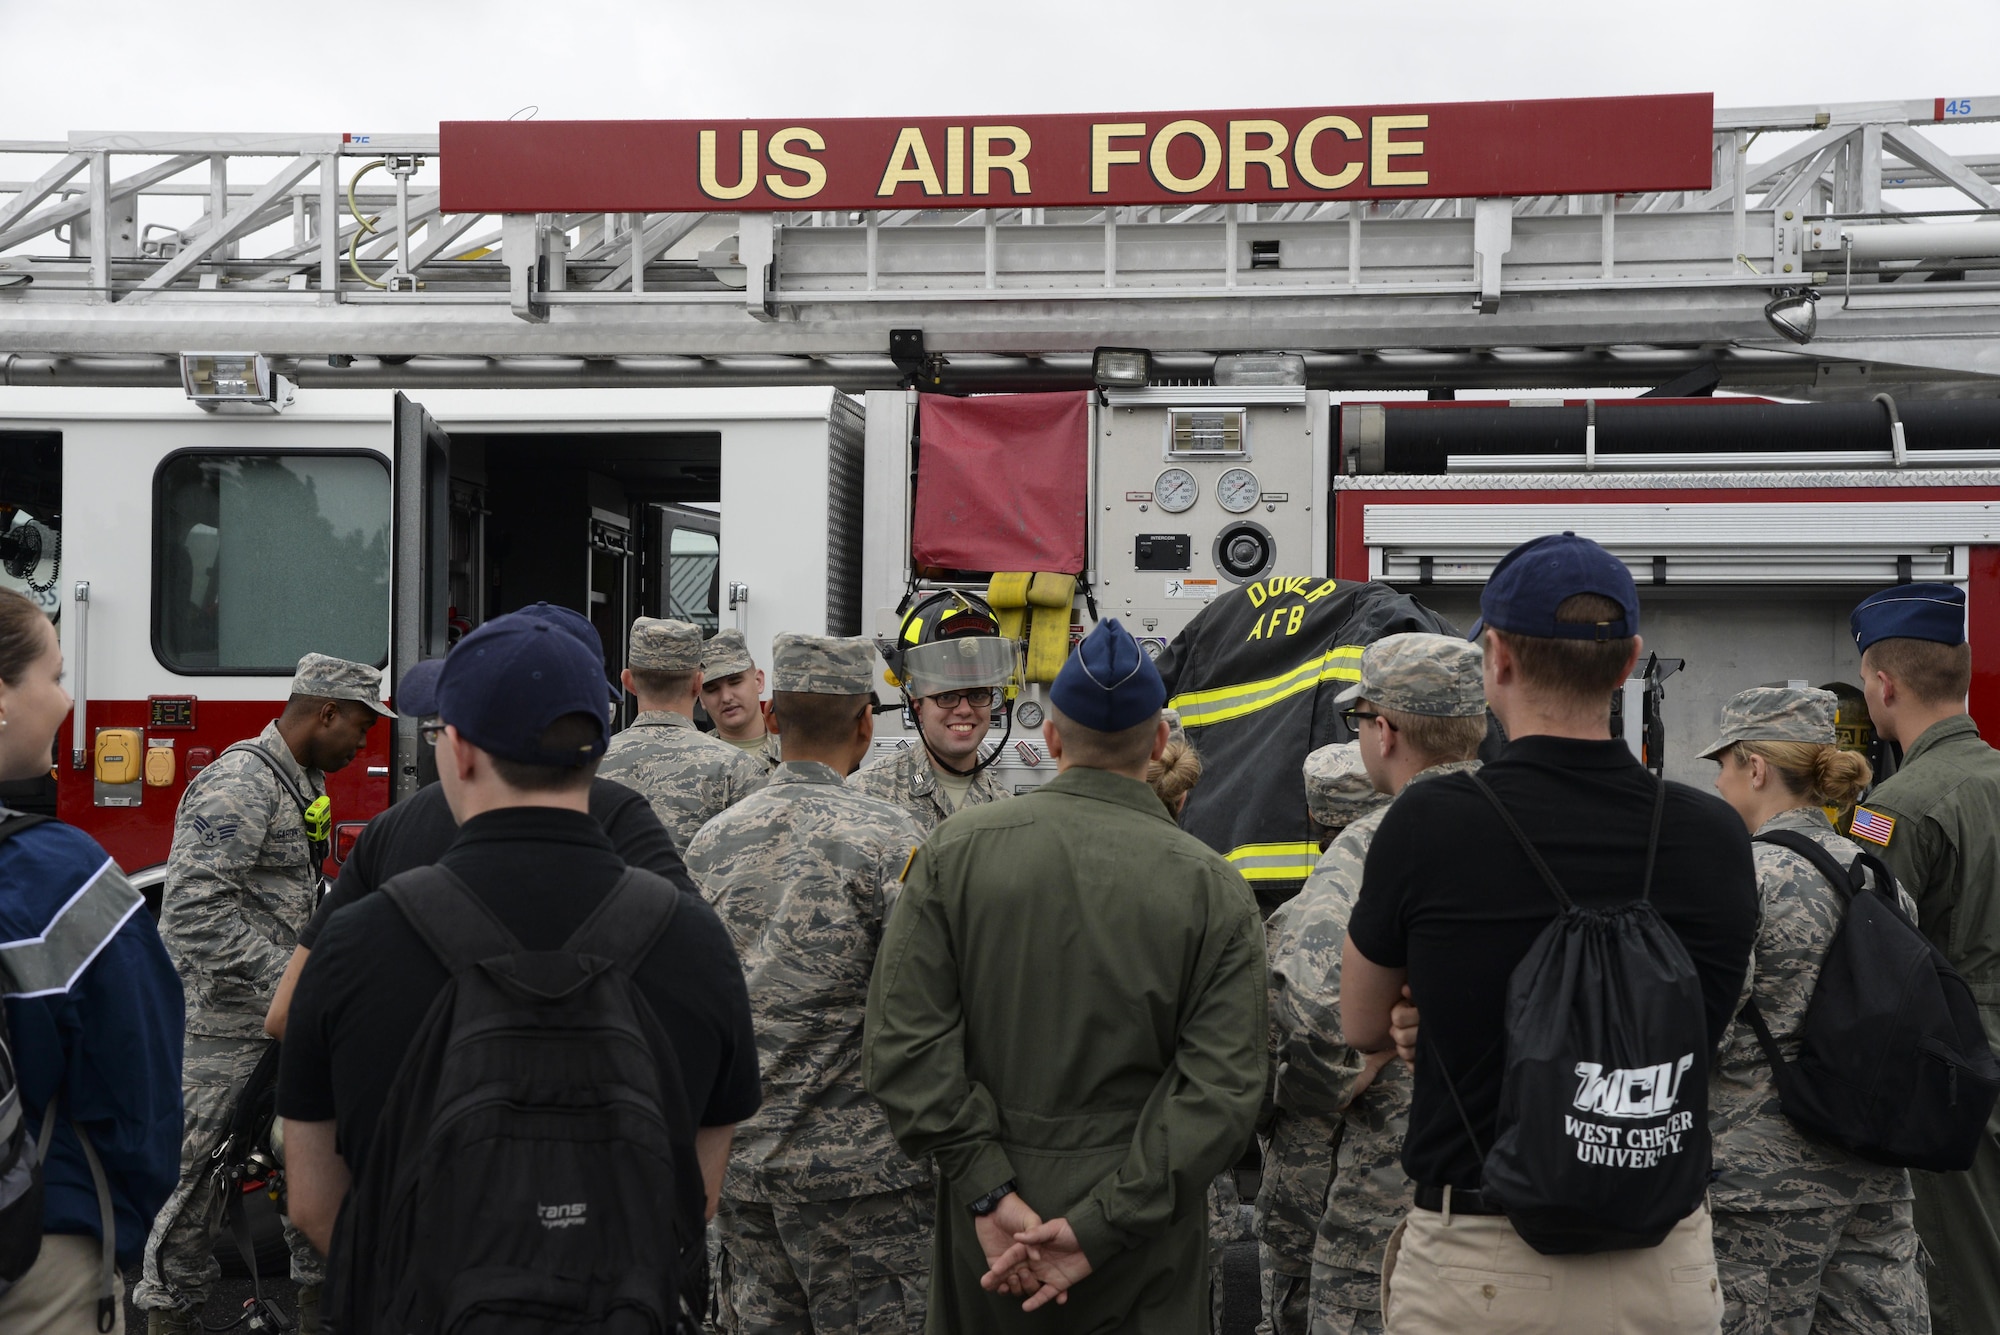 ROTC and Junior ROTC cadets interact with members of the 436th Civil Engineer Squadron fire department Oct. 11, 2017, during a Pathways to Blue tour at Dover Air Force Base, Del. Team Dover’s firefighters showed some specialty equipment and explained what their military service was like. (U.S. Air Force photo by Staff Sgt. Aaron J. Jenne)